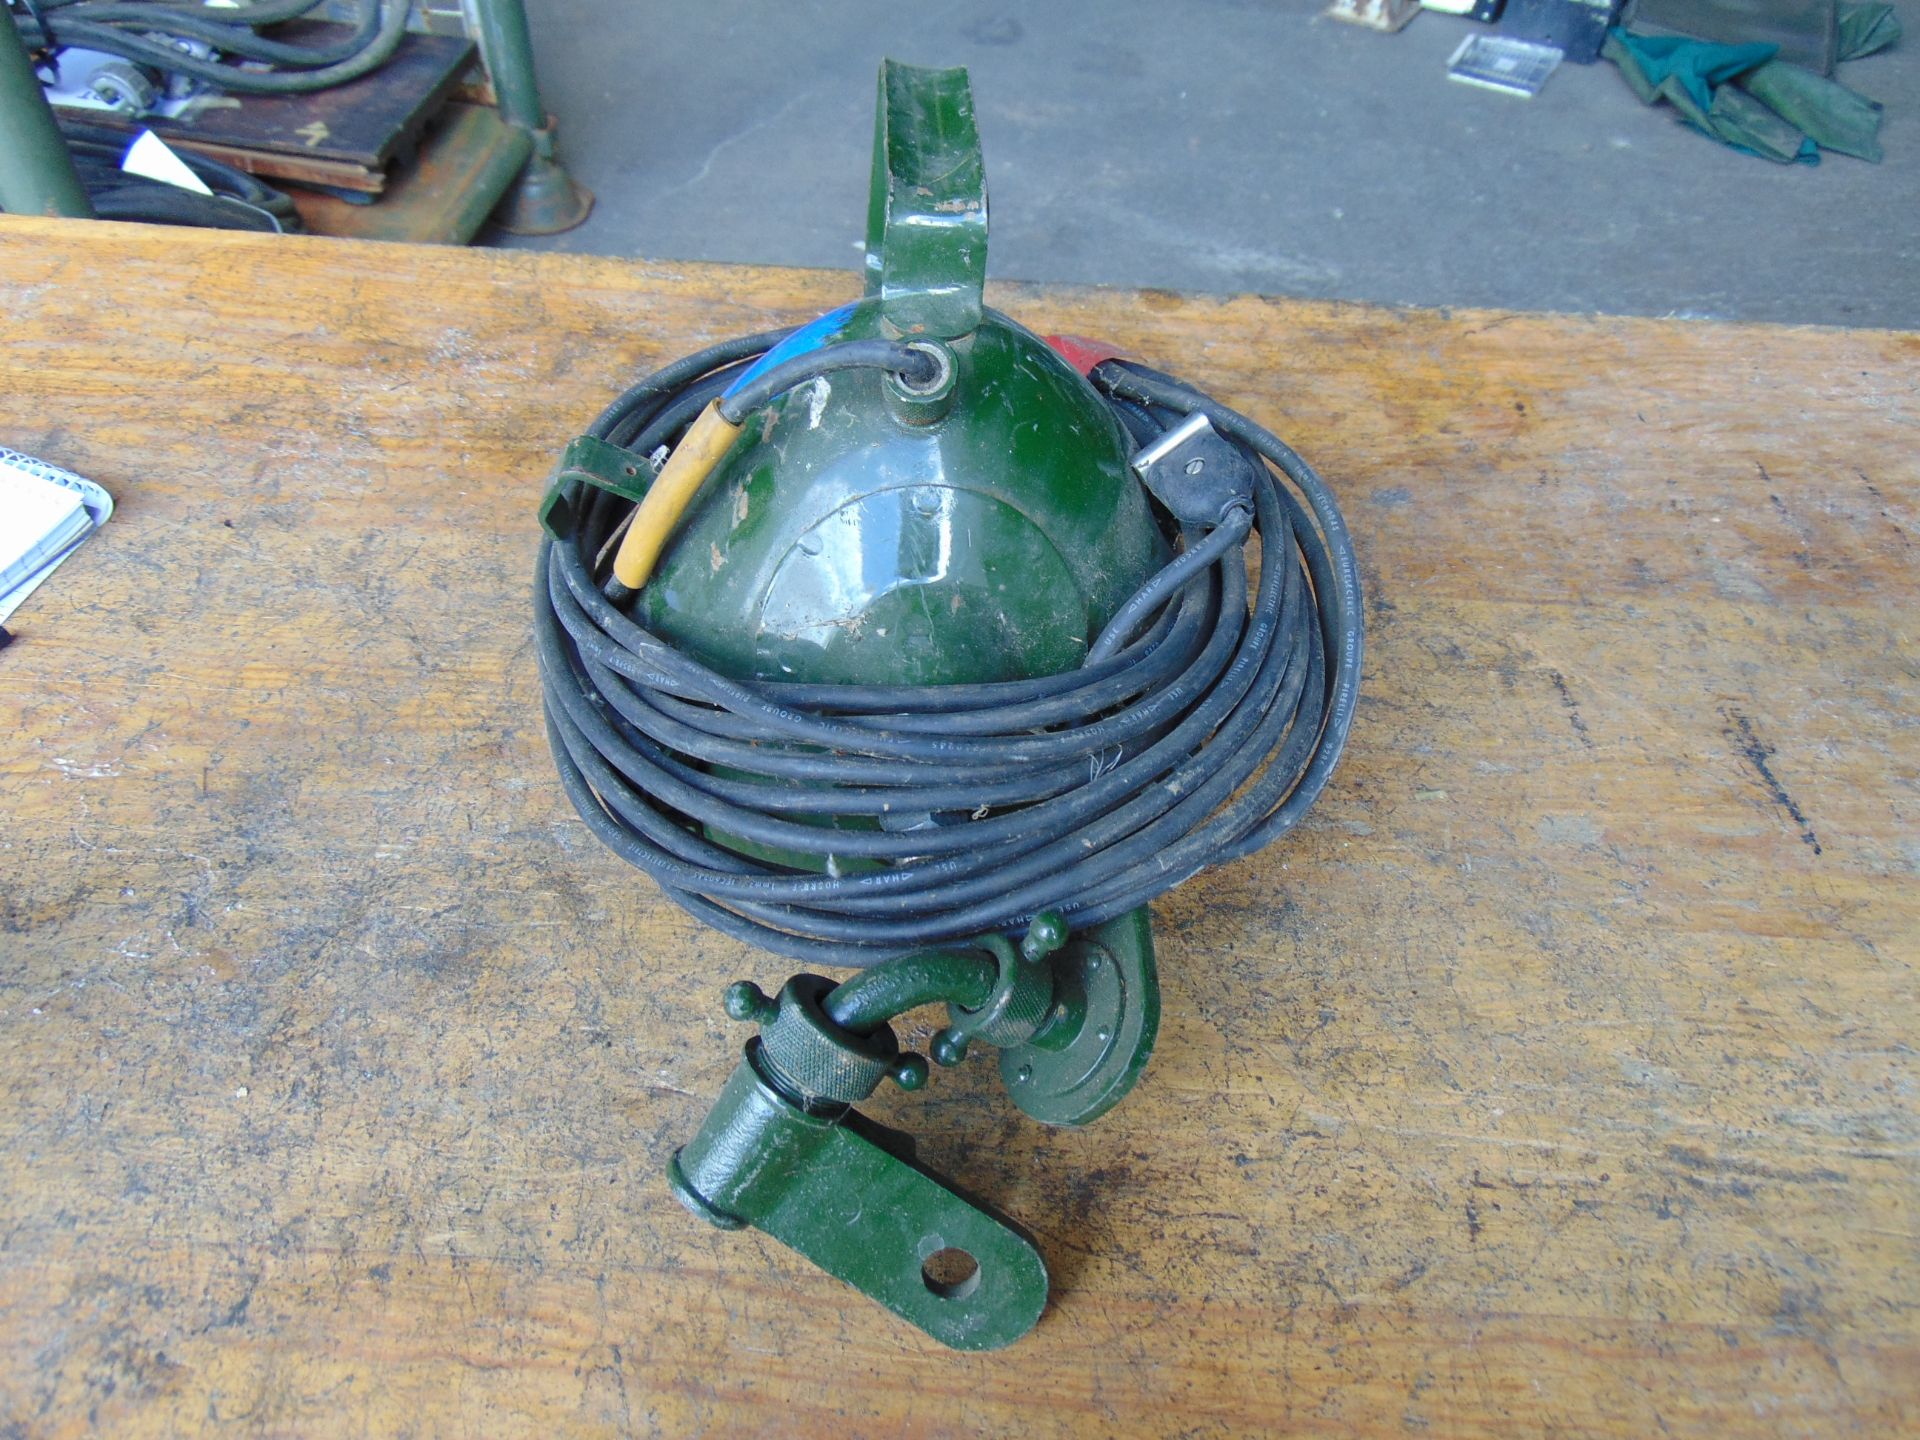 British Army FV159907 Vehicle Spot Lamp c/w Cable, Bracket & Plug, * Need Glass Replacing * - Image 3 of 4